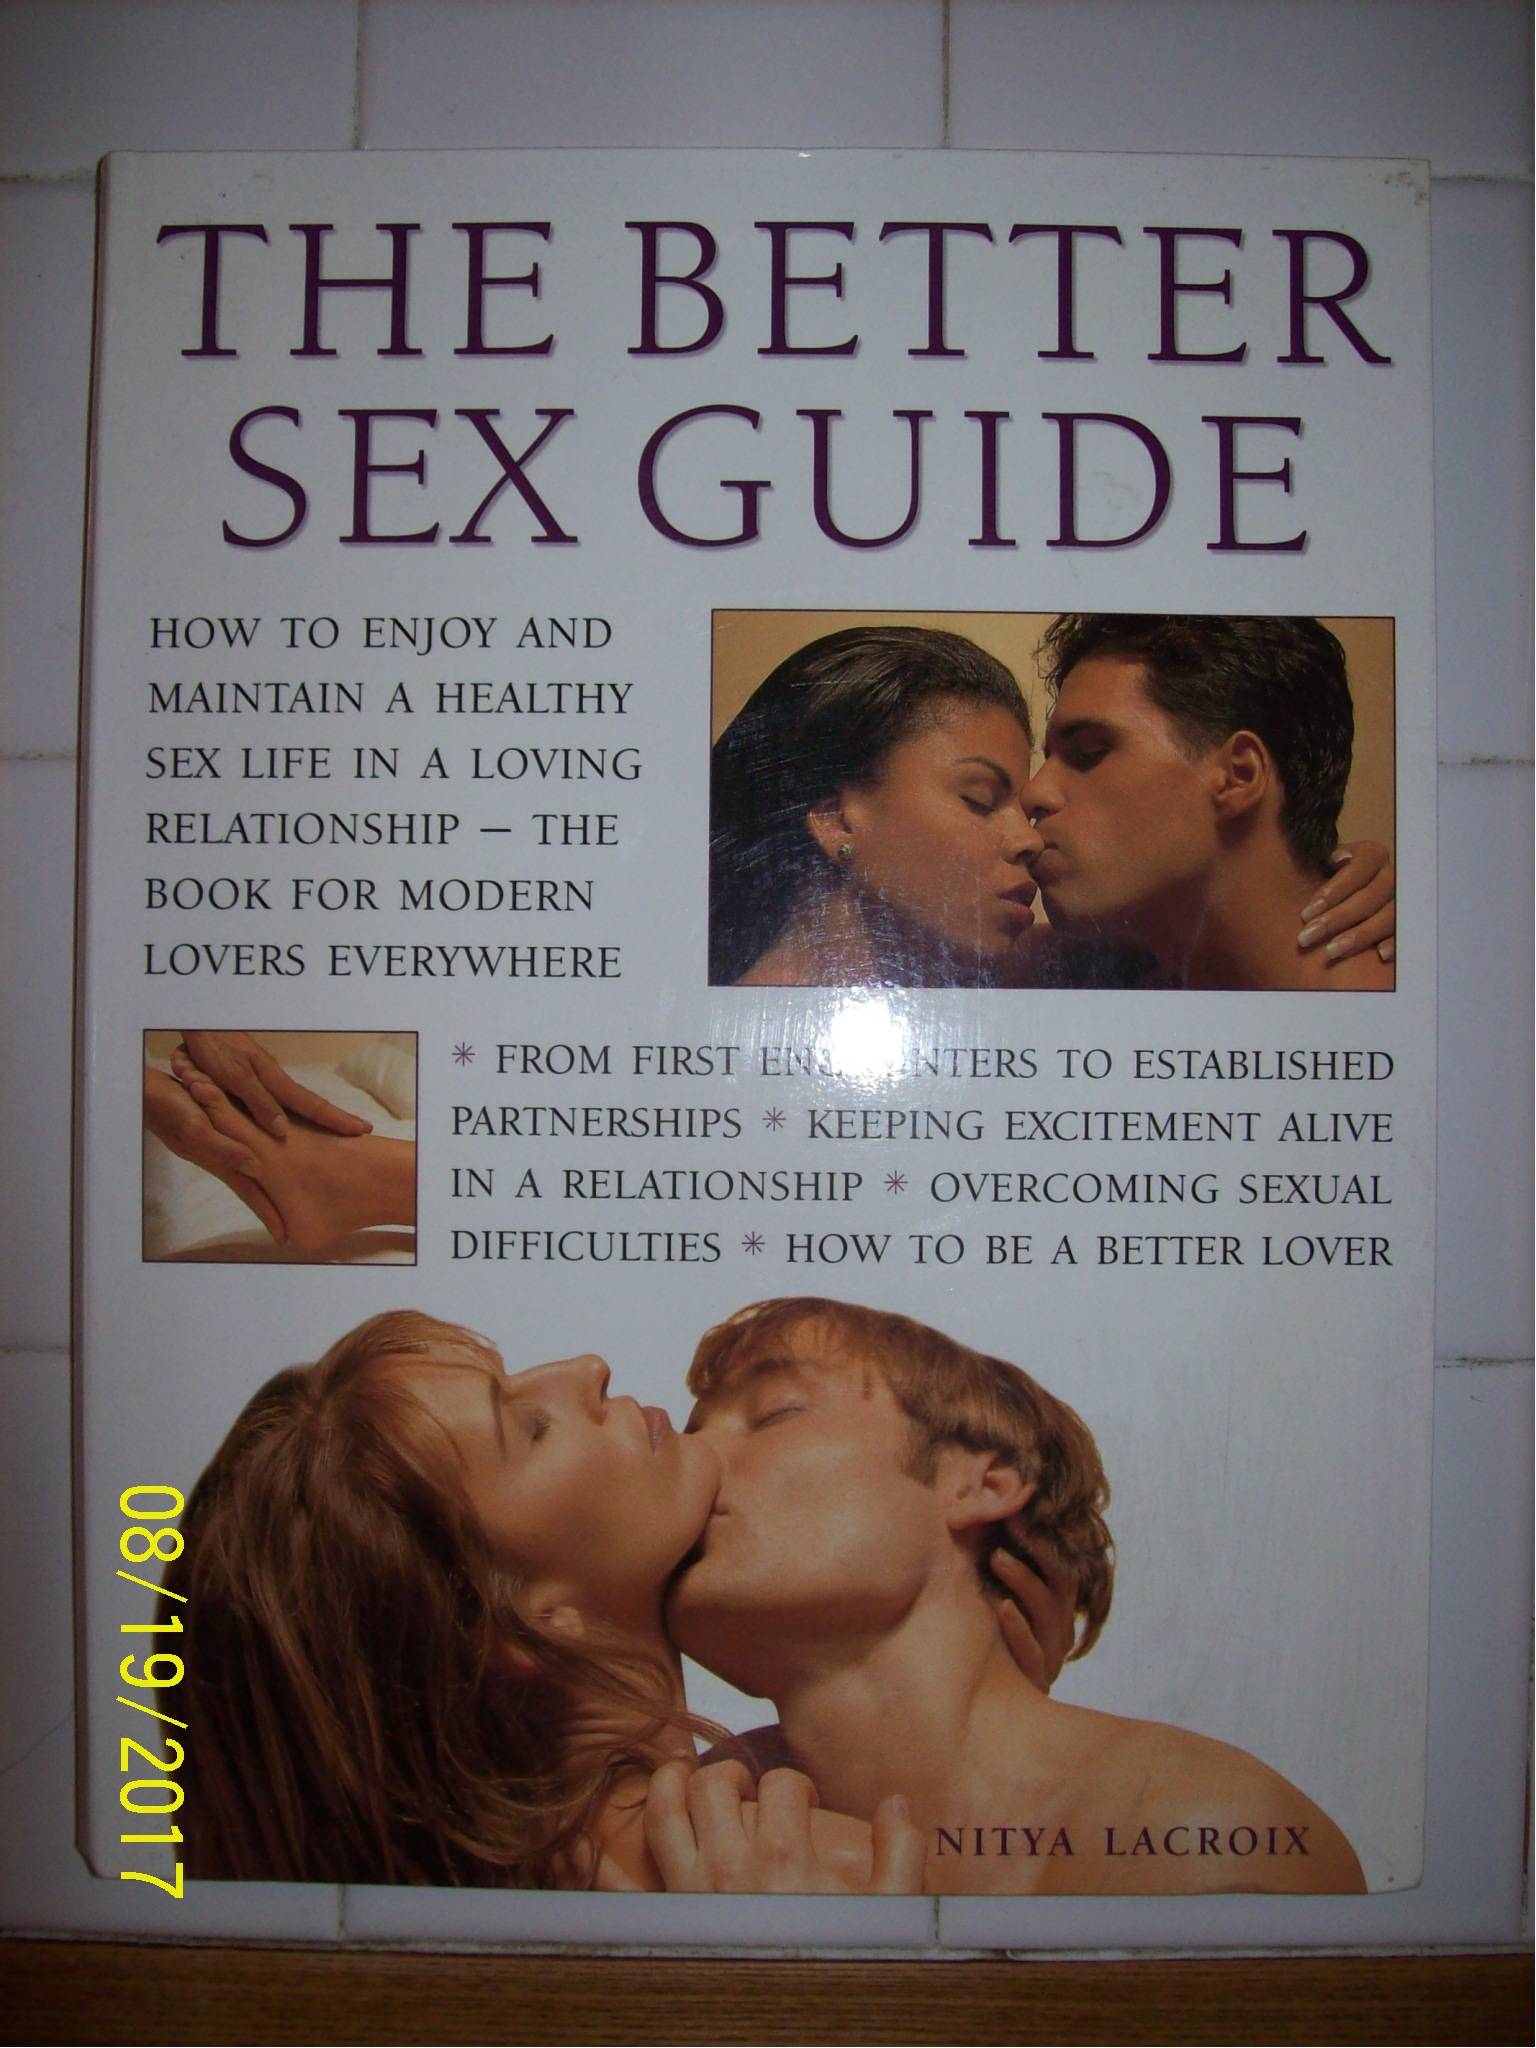 The Better Sex Guide, by Nitya Lacroix